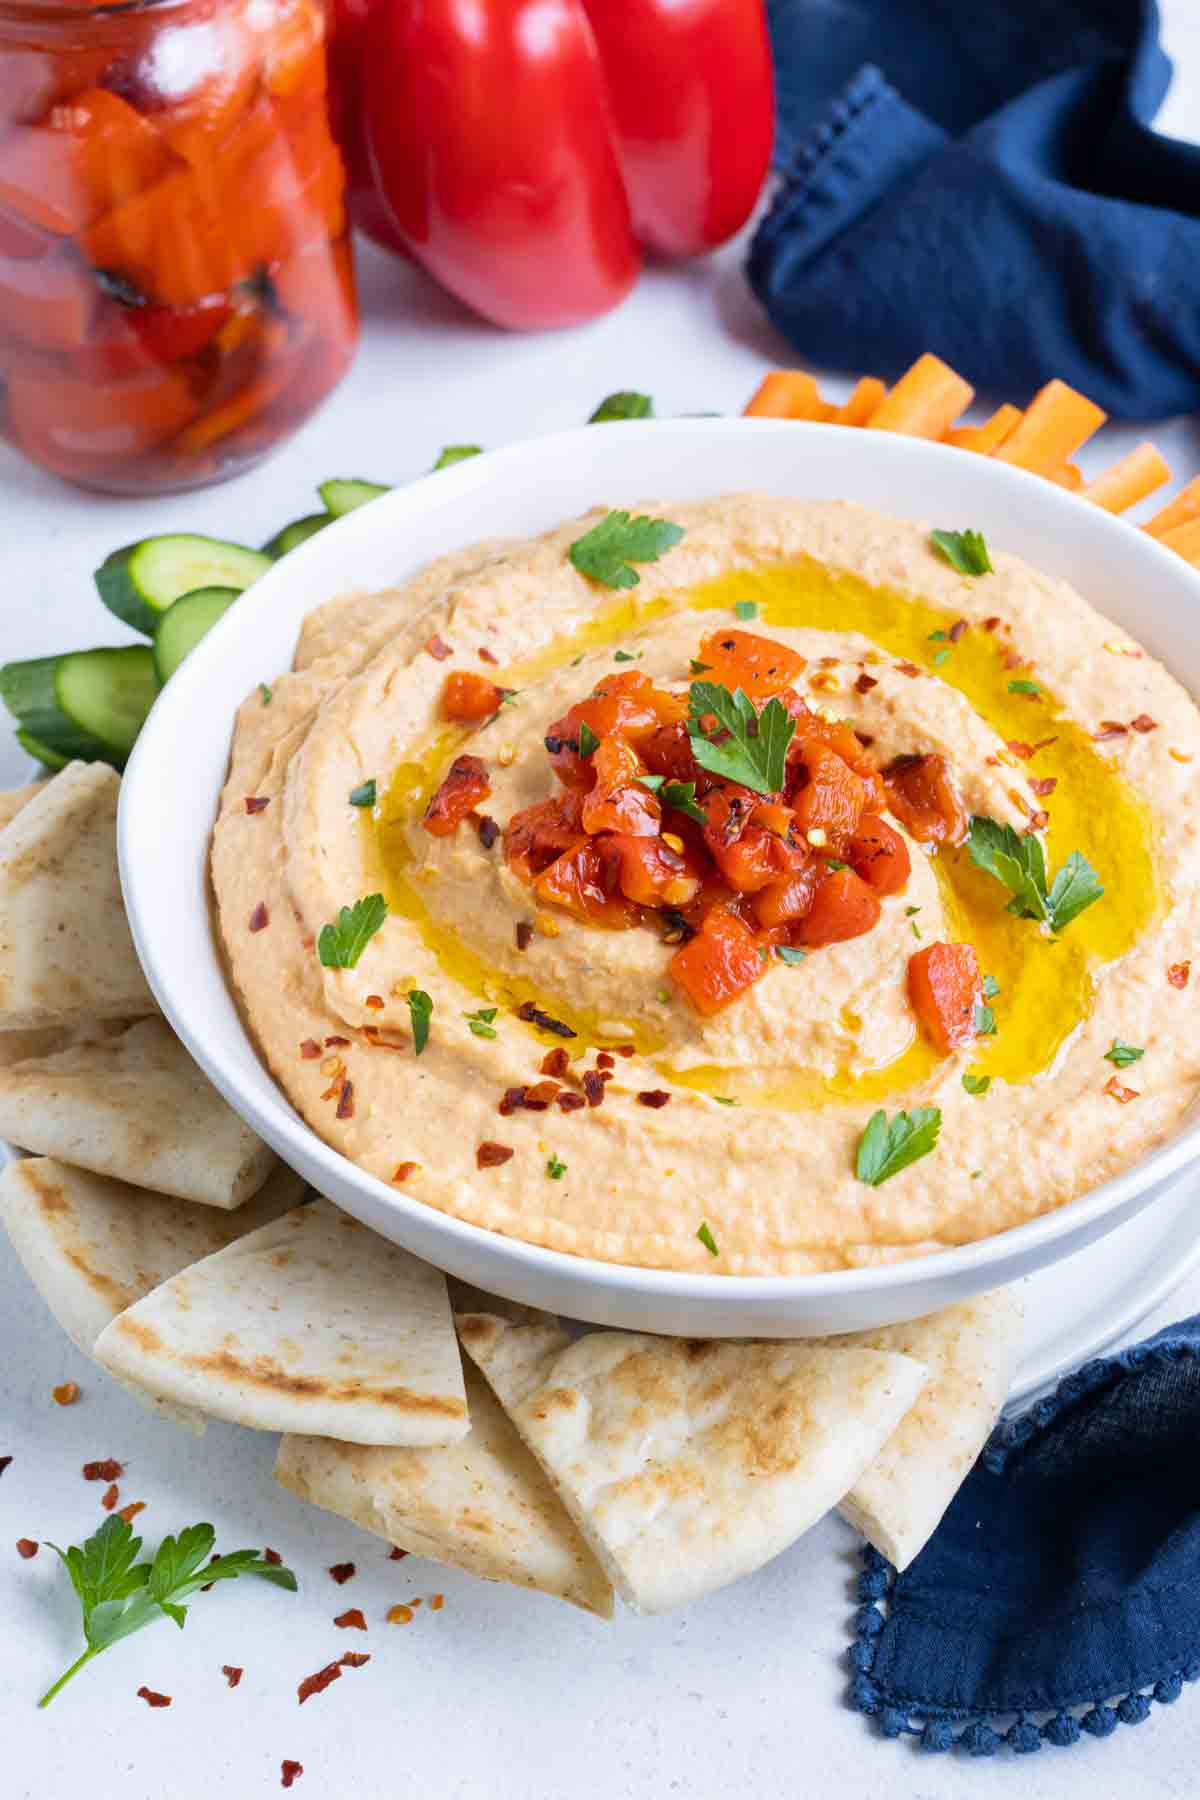 Creamy hummus is served with vegetables and pita.